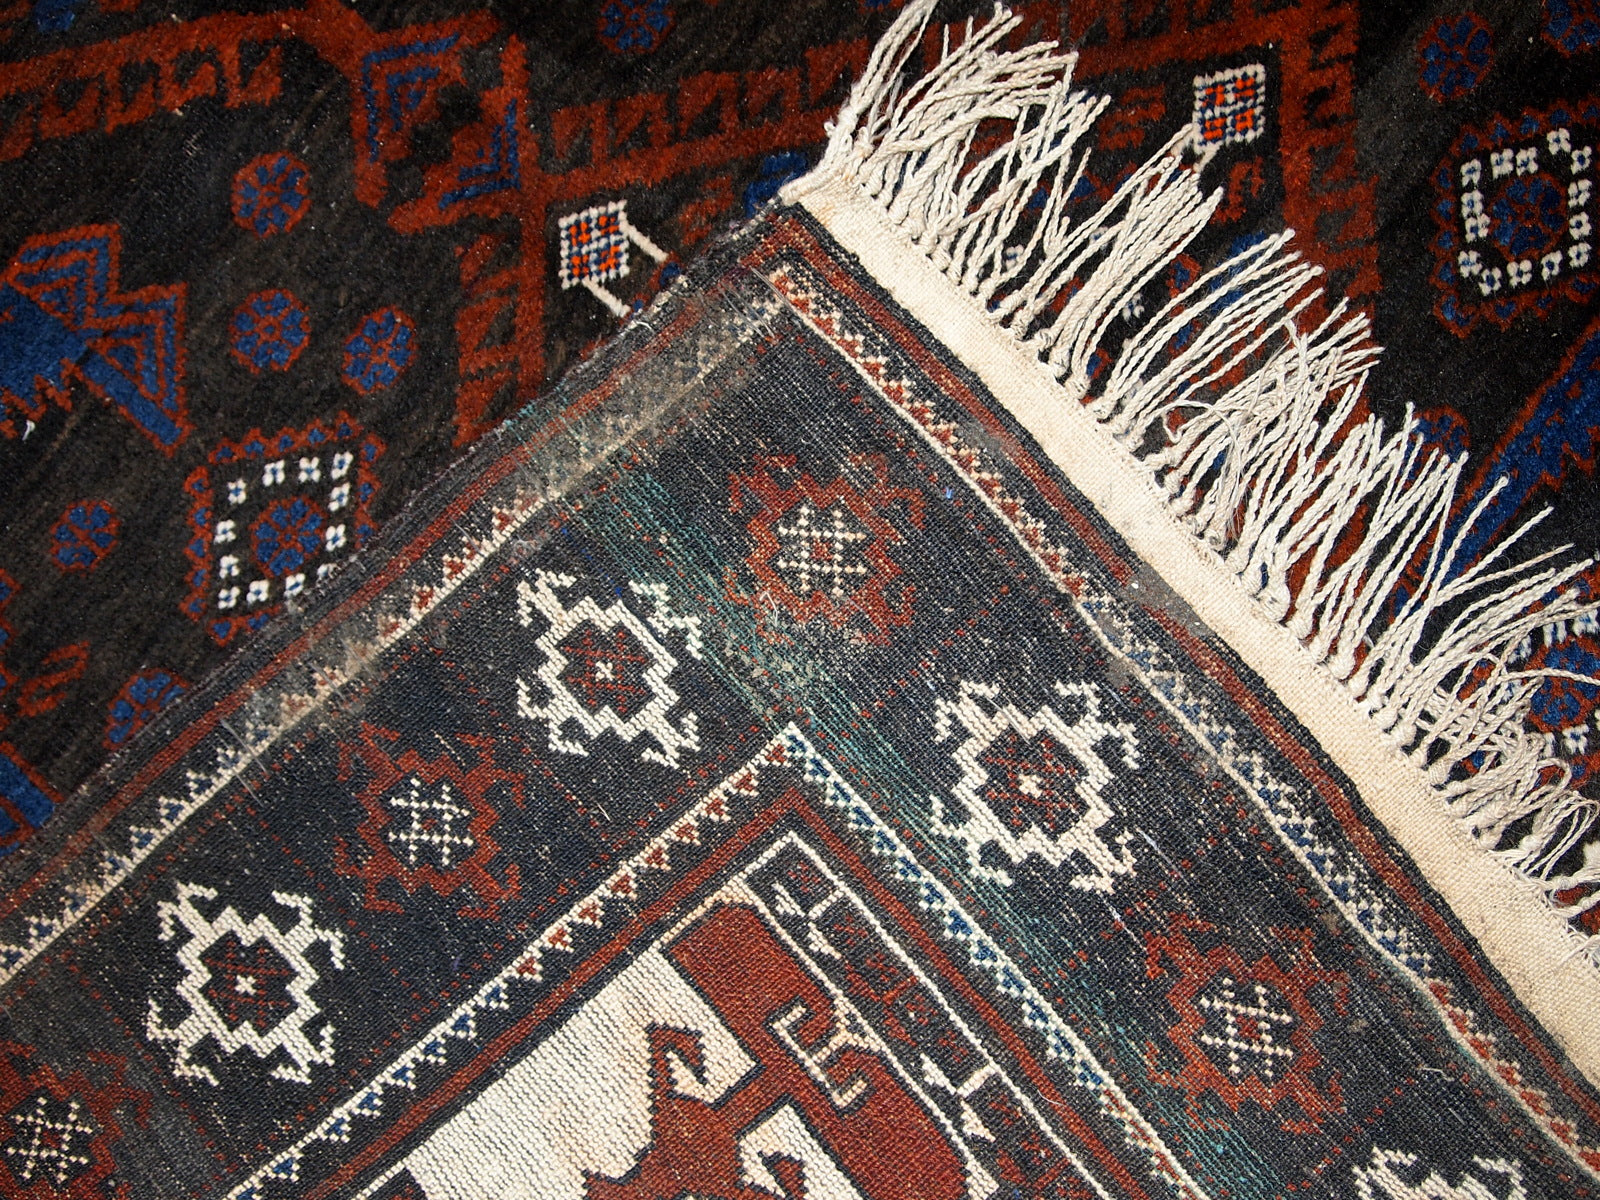 Detailed shot of the rug's corners and tribal motifs.